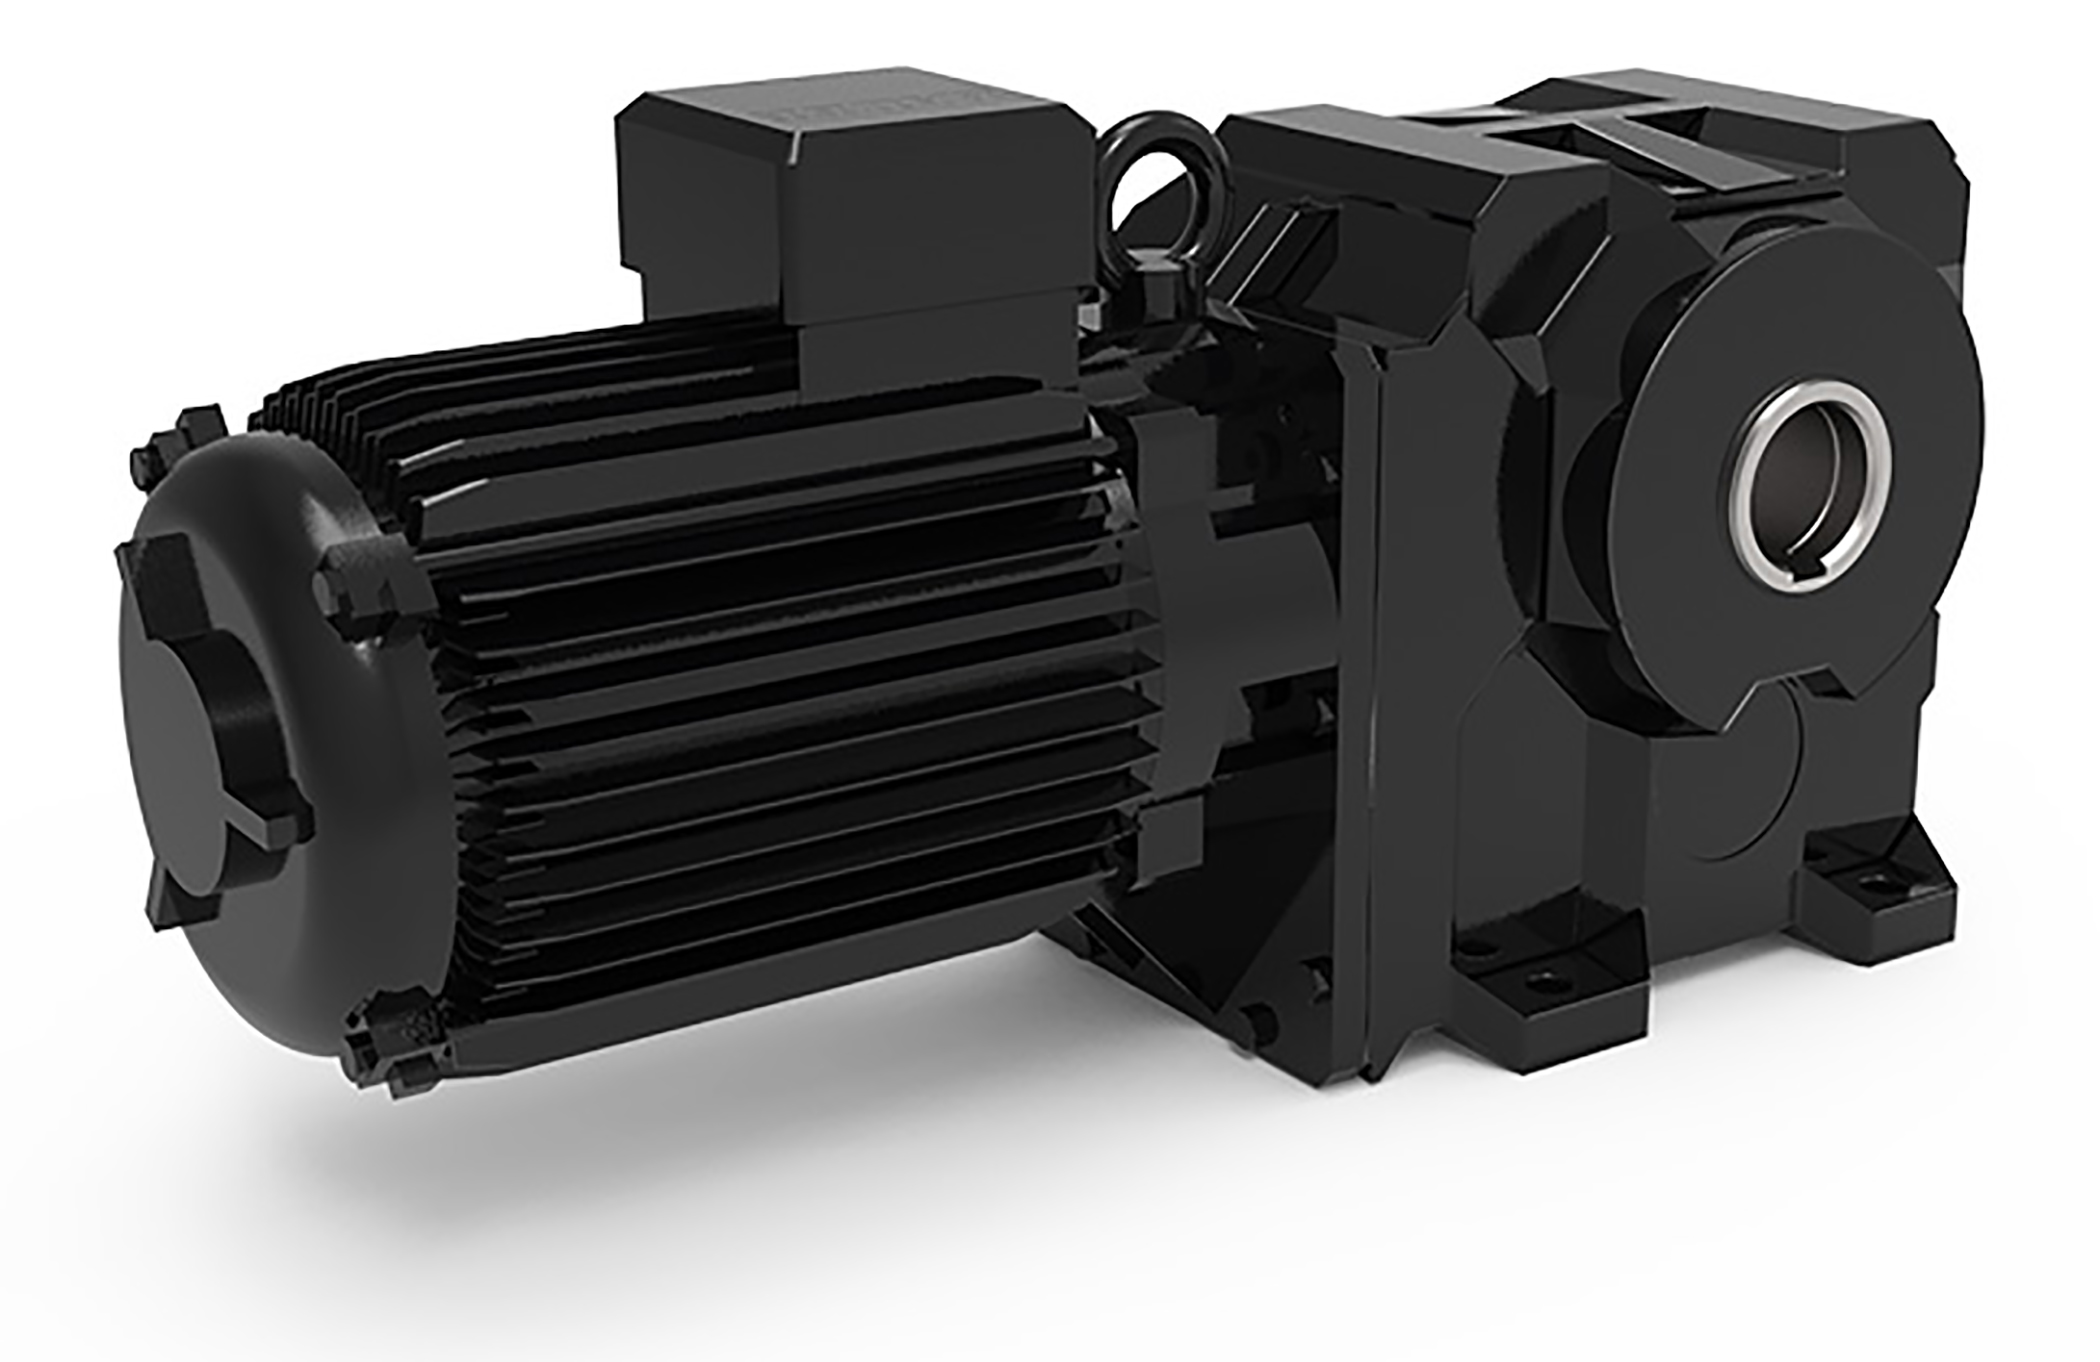 An established supplier of highly efficient gear motors for water and wastewater applications, Bauer will showcase its market-leading technologies at IFAT.